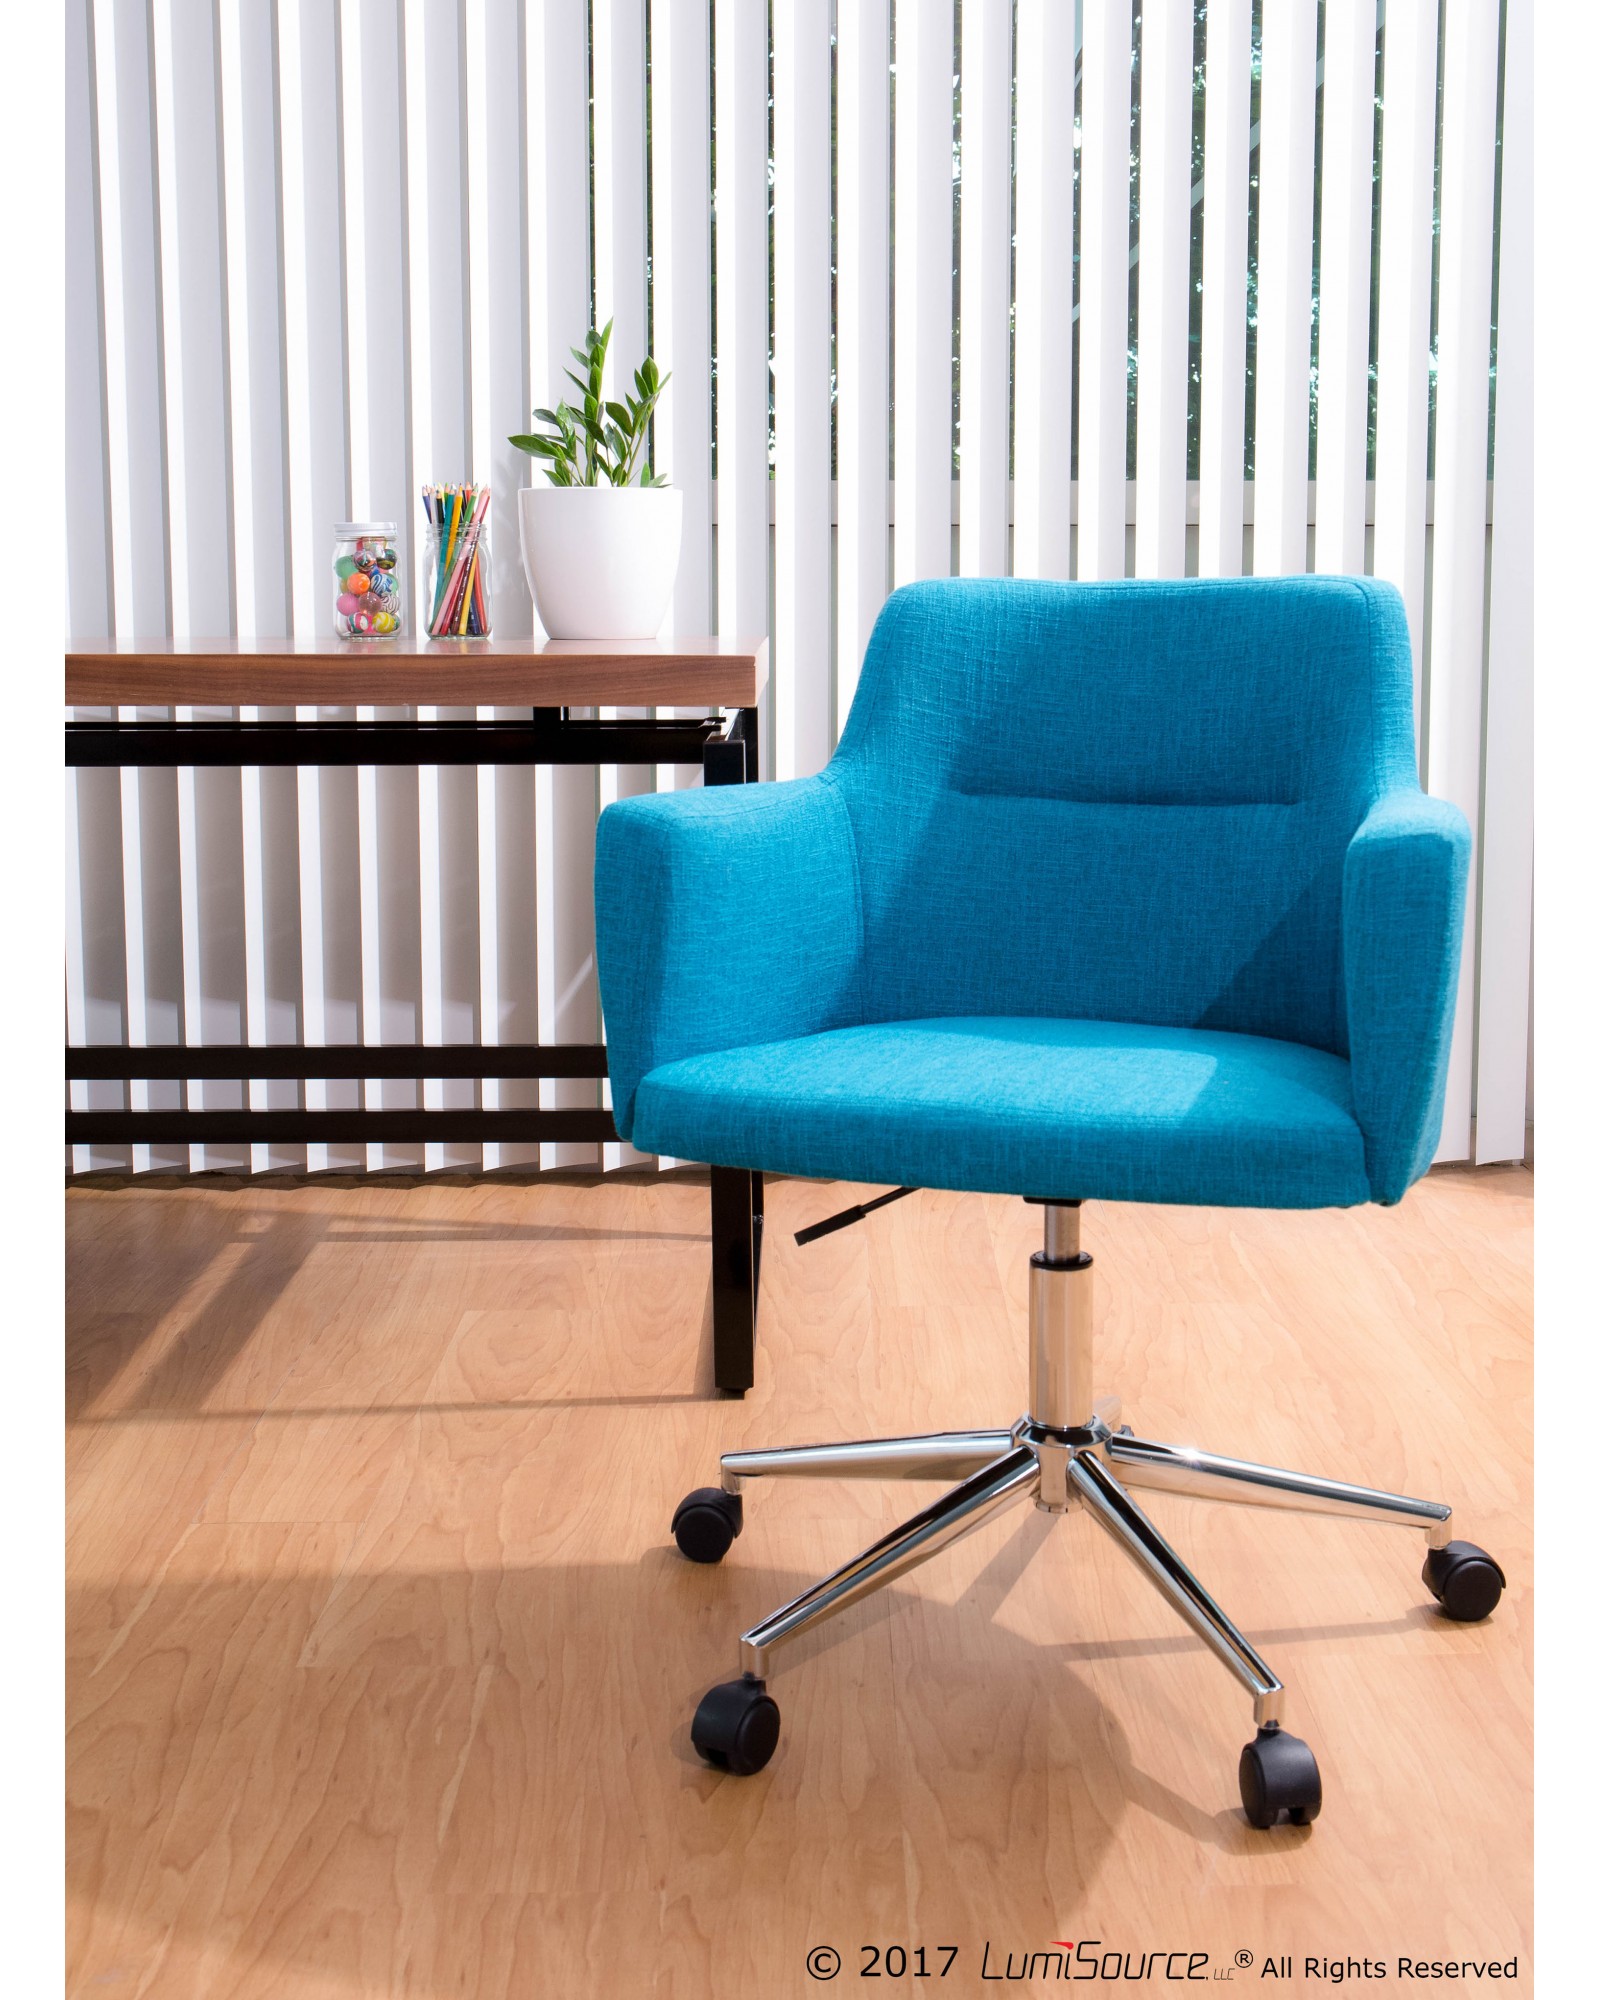 Andrew Contemporary Adjustable Office Chair in Teal